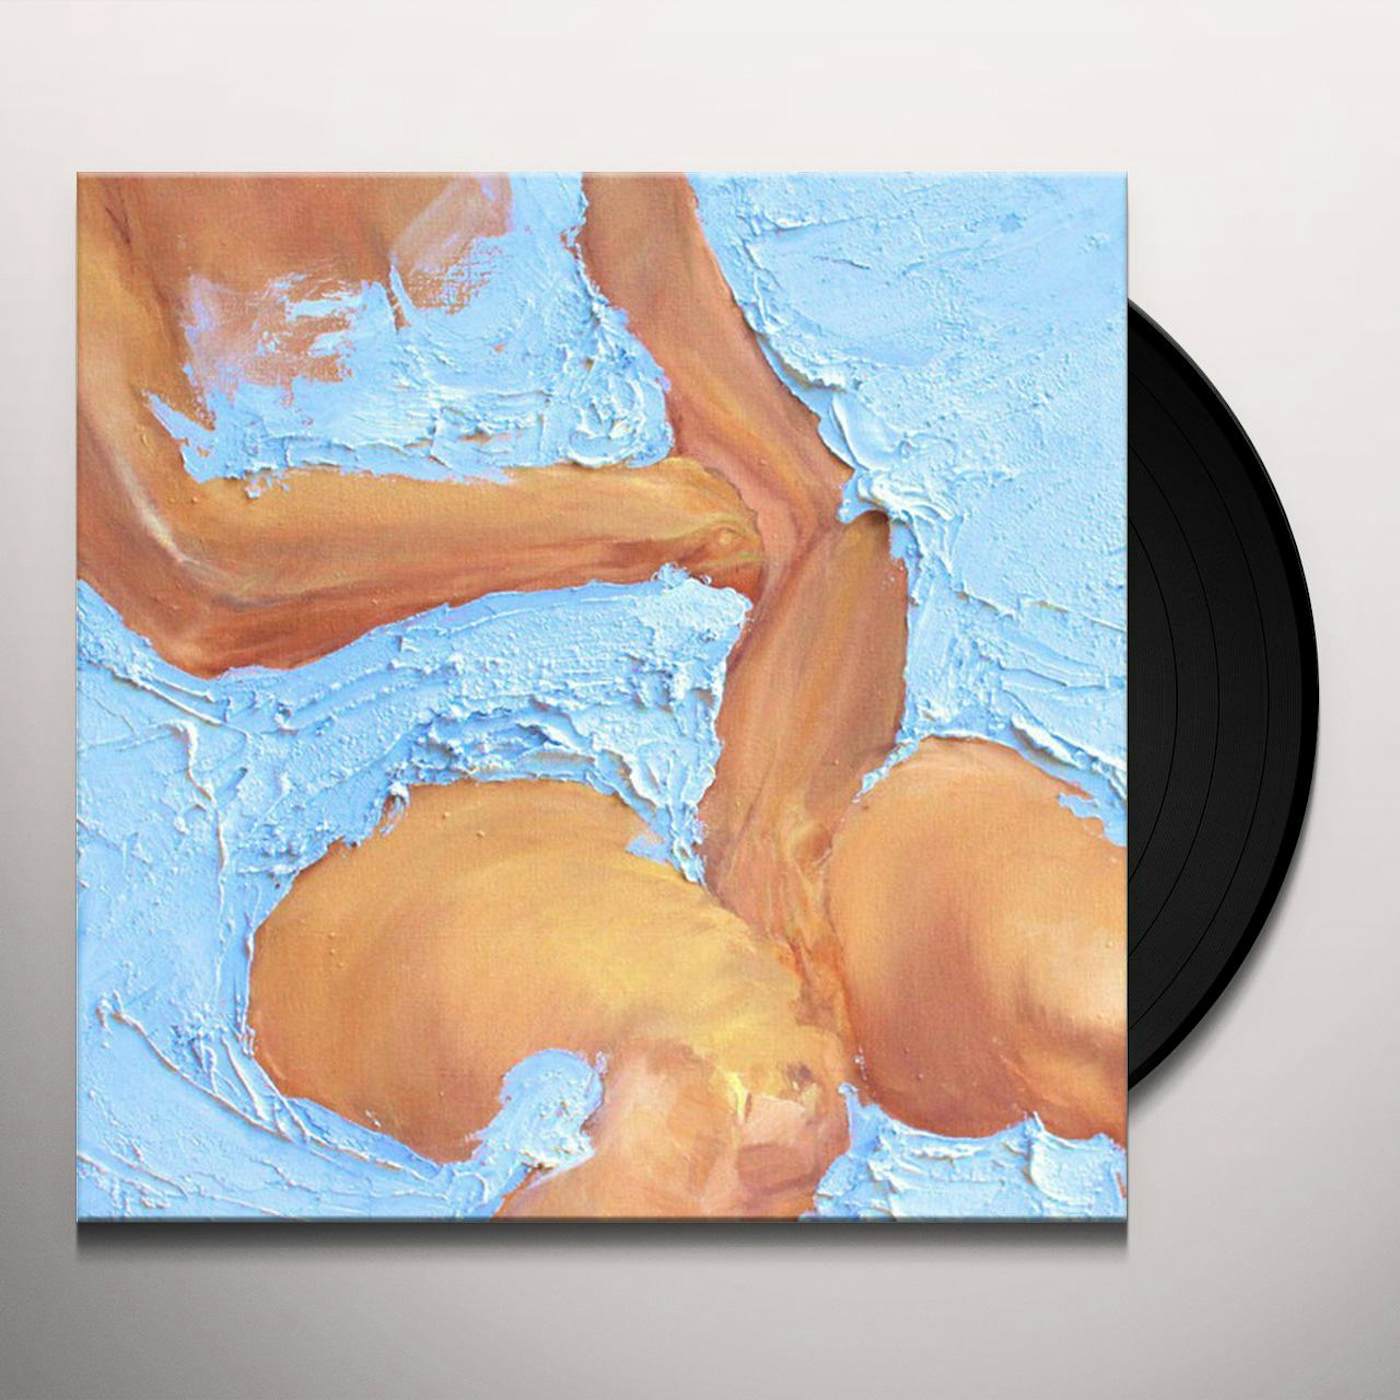 Gengahr She's a witch Vinyl Record